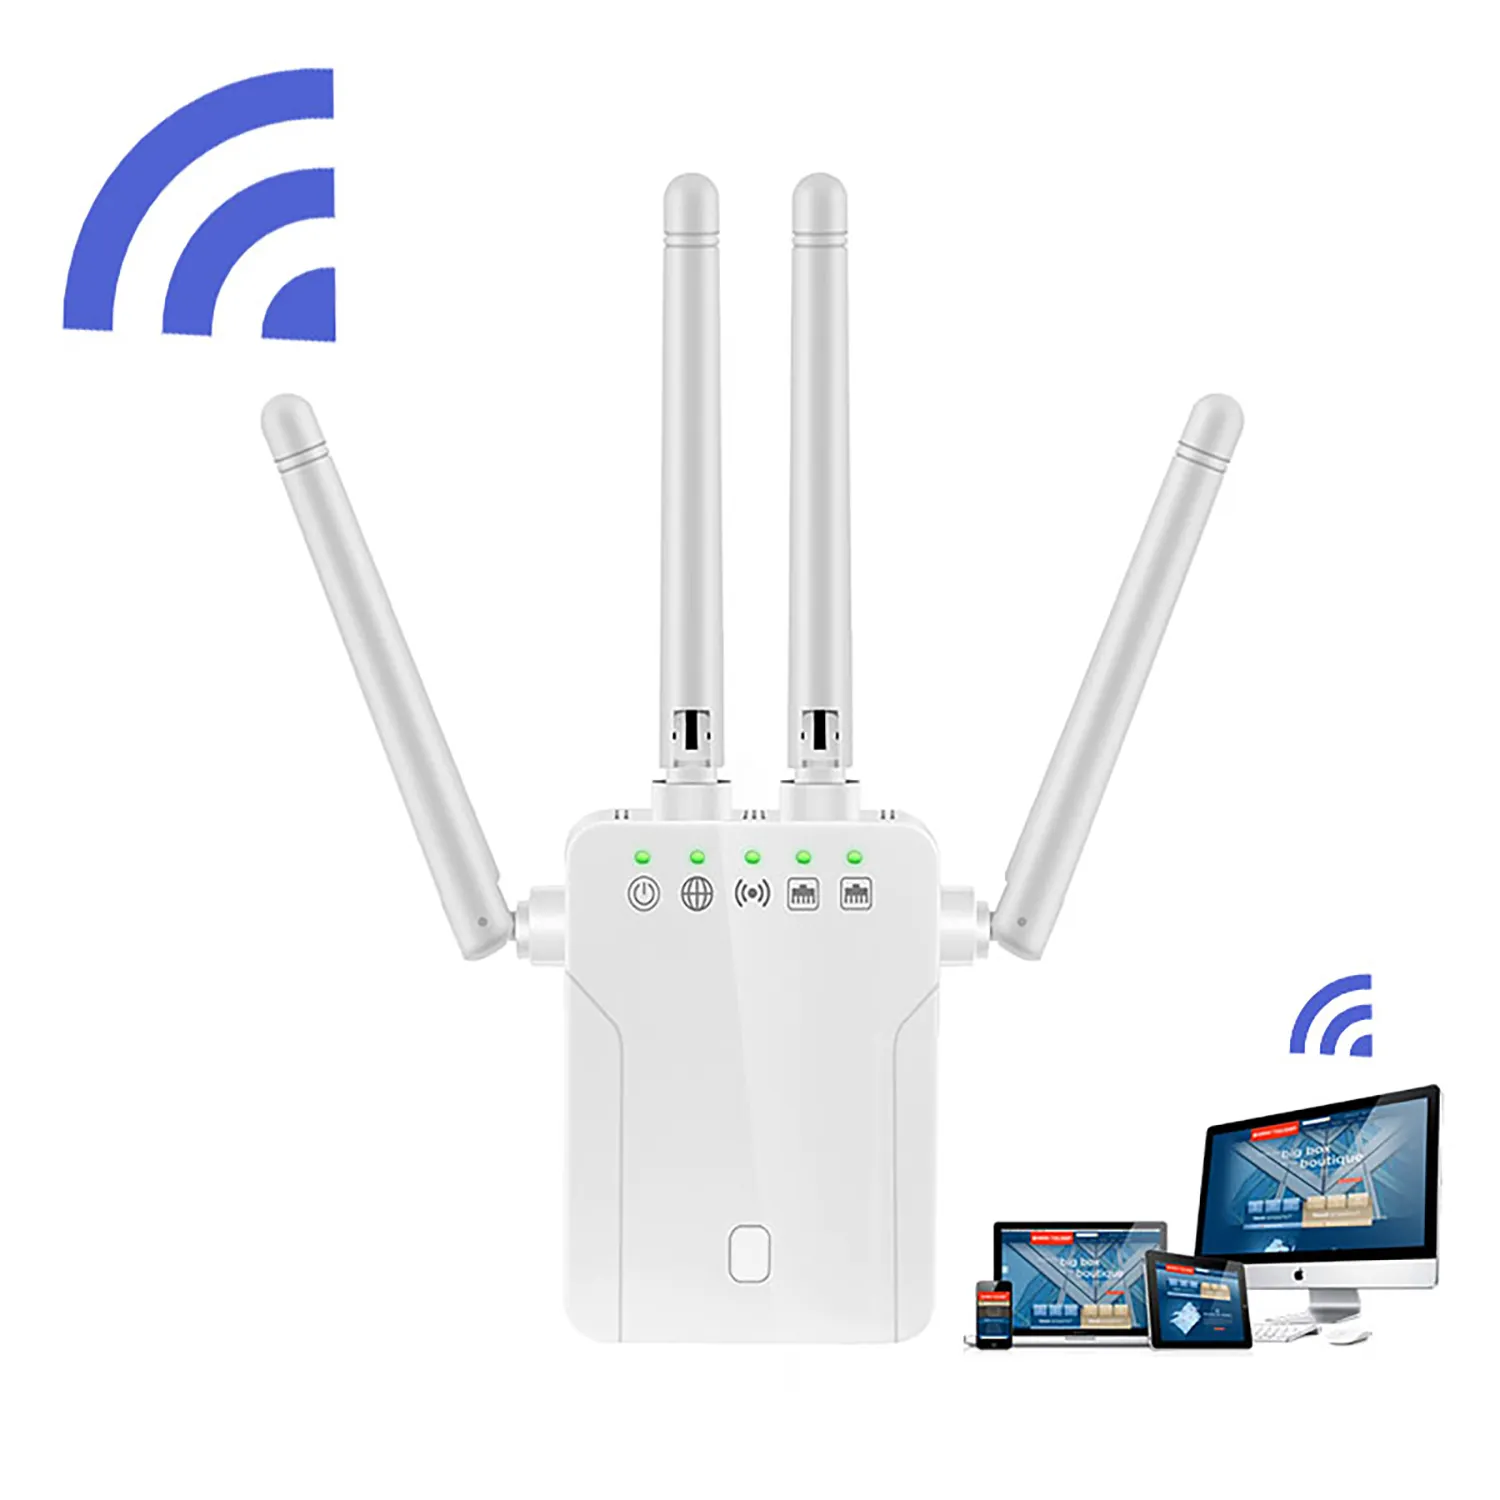 Hot Selling Dual Antenna 2.4g Rj45 Wireless Amplifier 300mbps Wifi Range Extender Support 40 Device